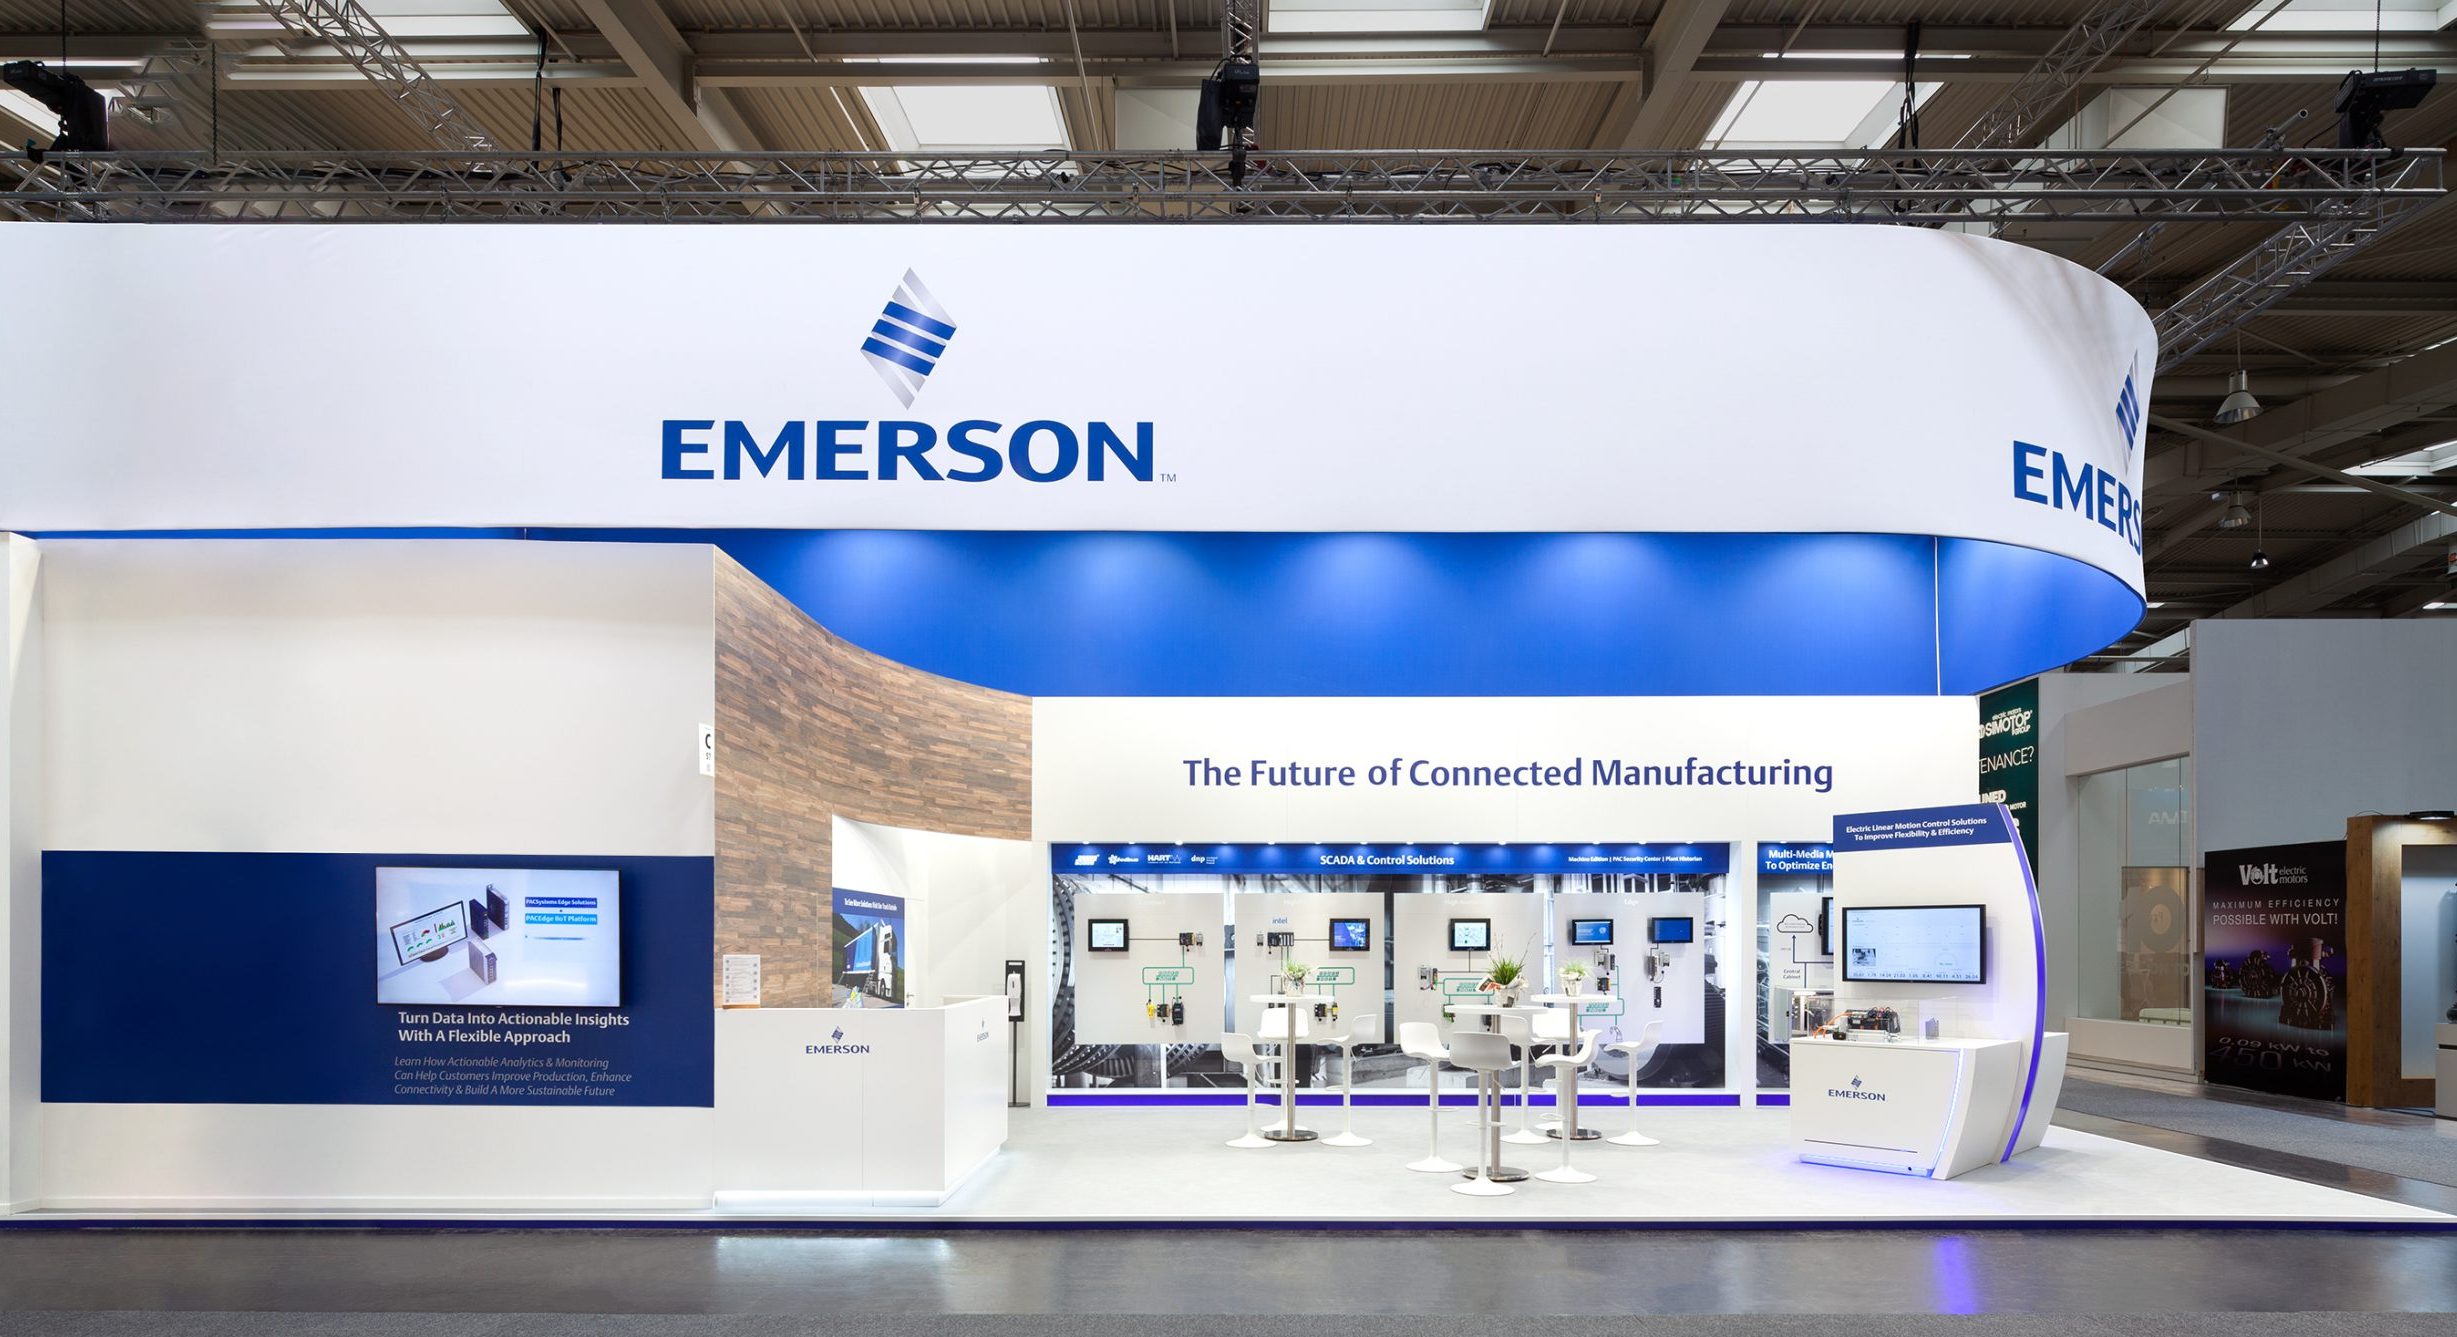 THE INSIDE - EMERSON - HMI 2022 - HANNOVER - STAND PHOTOGRAPHY - #7040 (Ir)